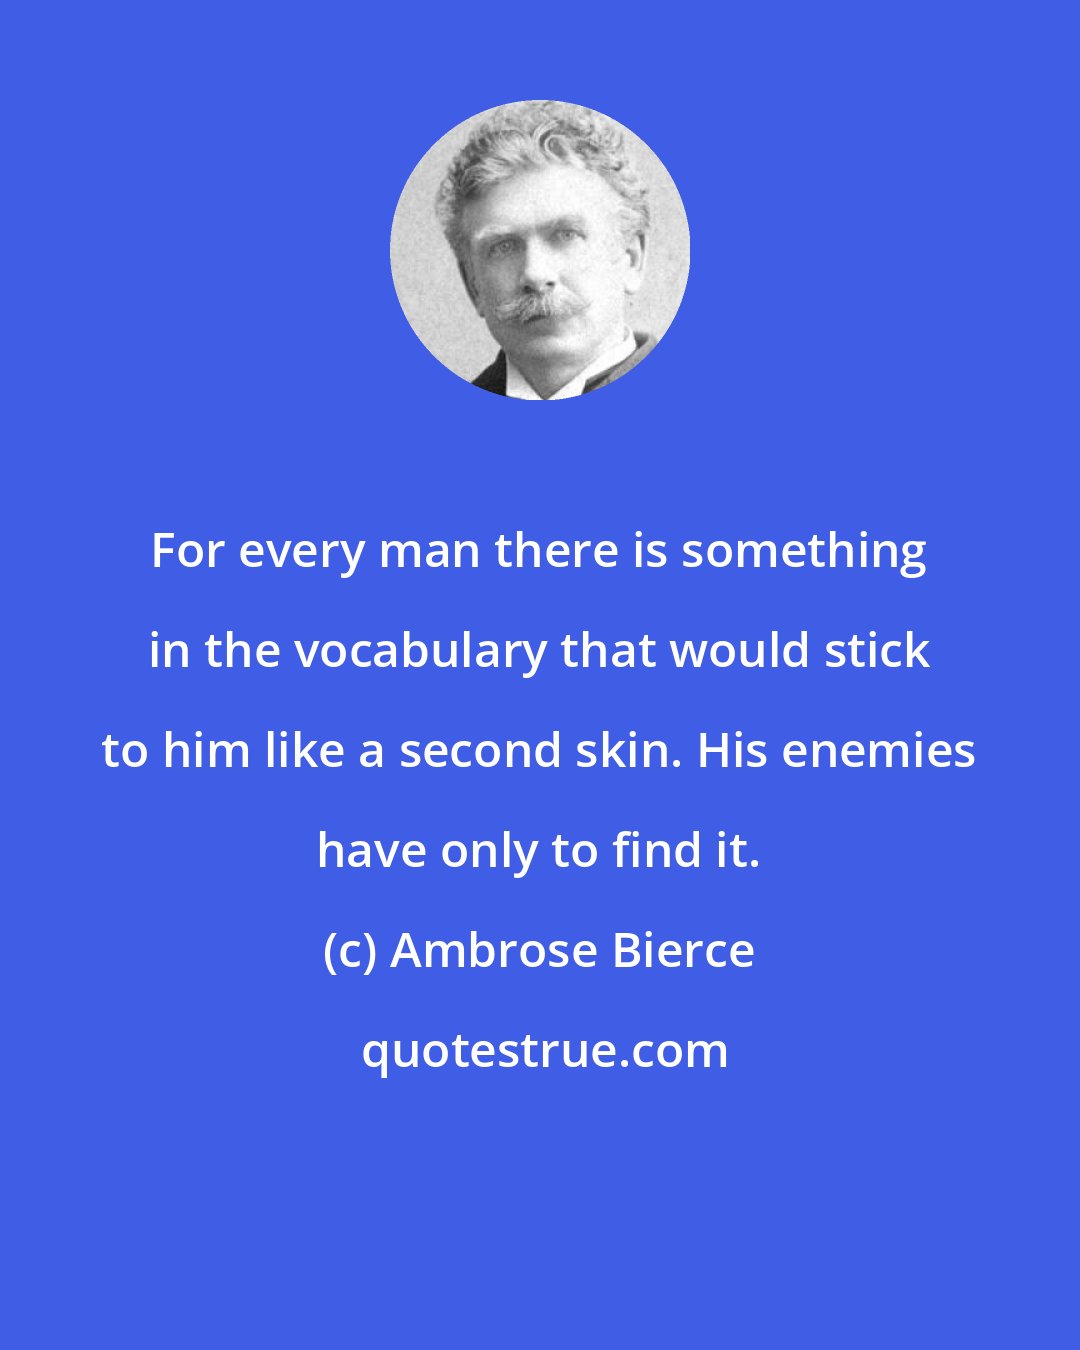 Ambrose Bierce: For every man there is something in the vocabulary that would stick to him like a second skin. His enemies have only to find it.